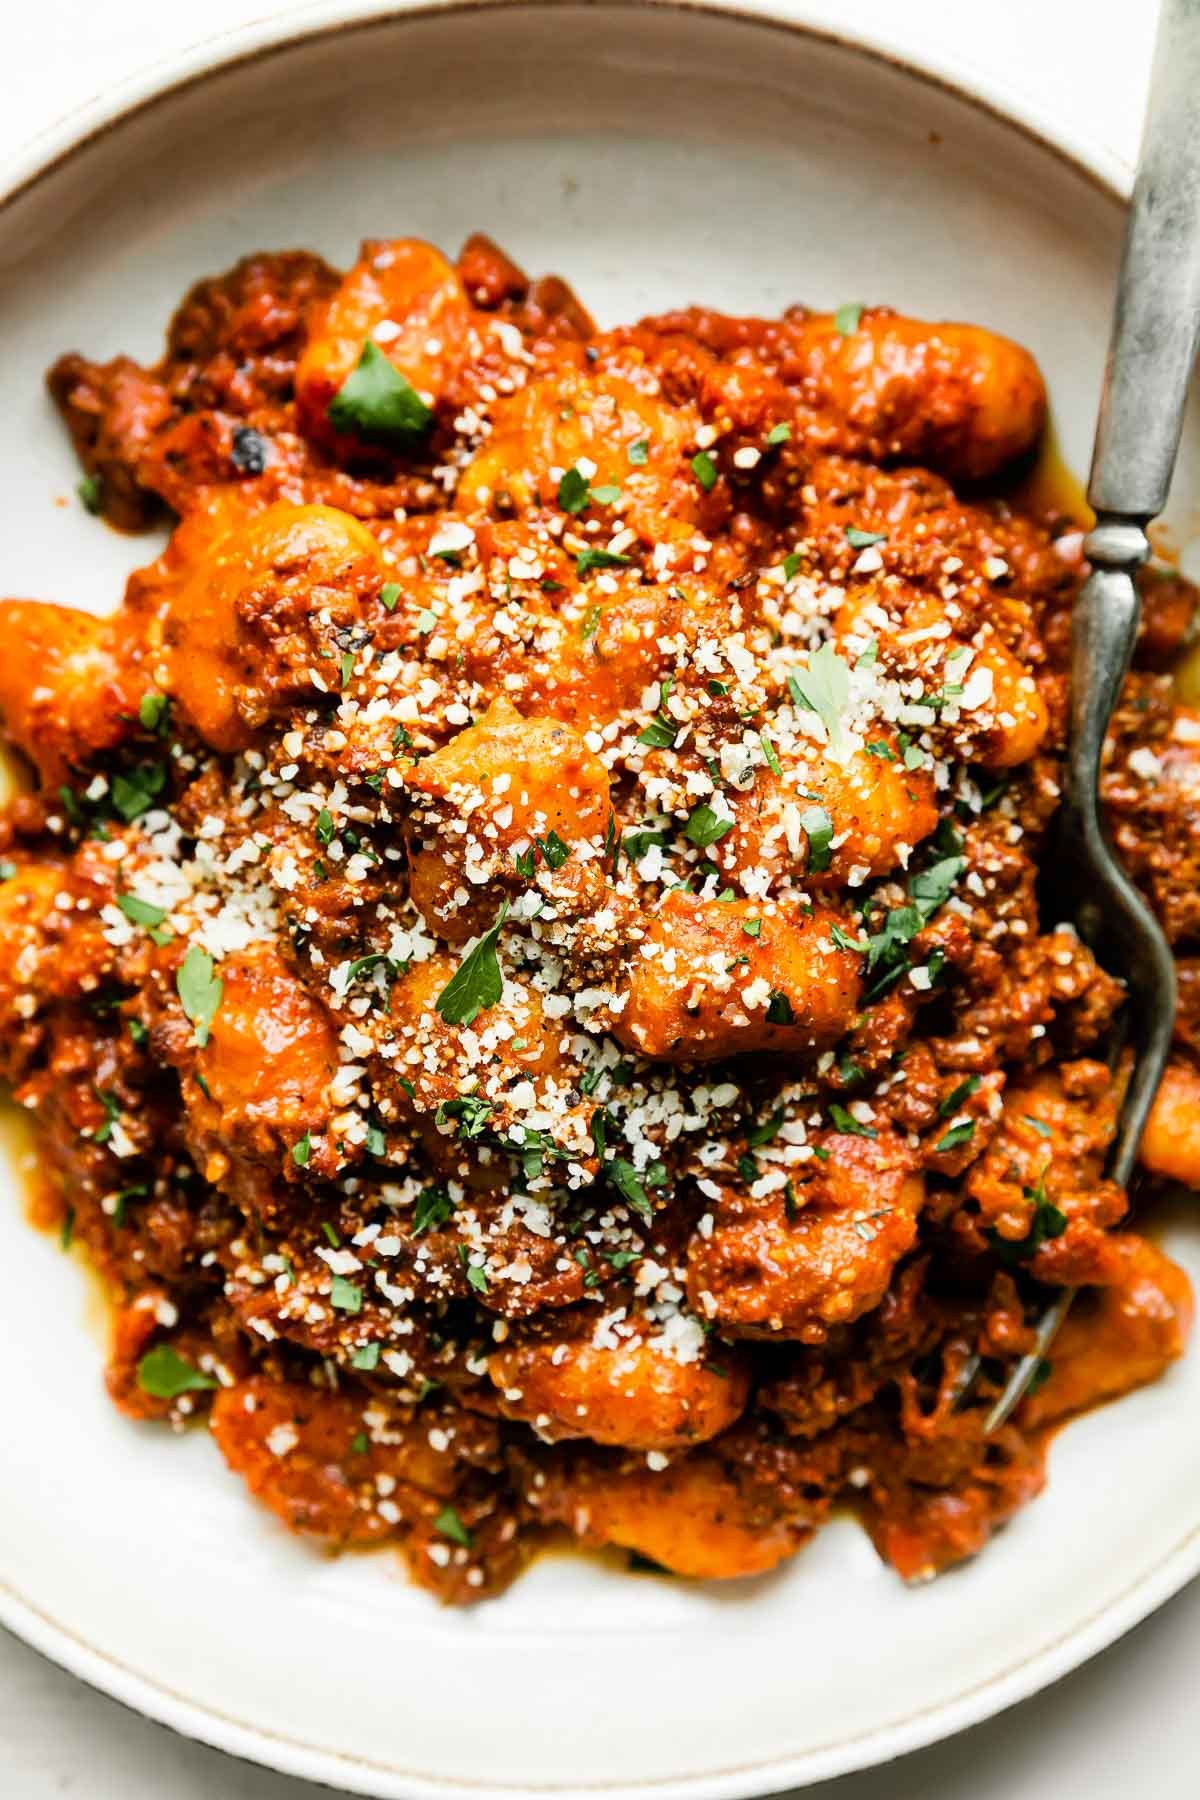 Gnocchi with Meat Sauce Recipe: How to Make It